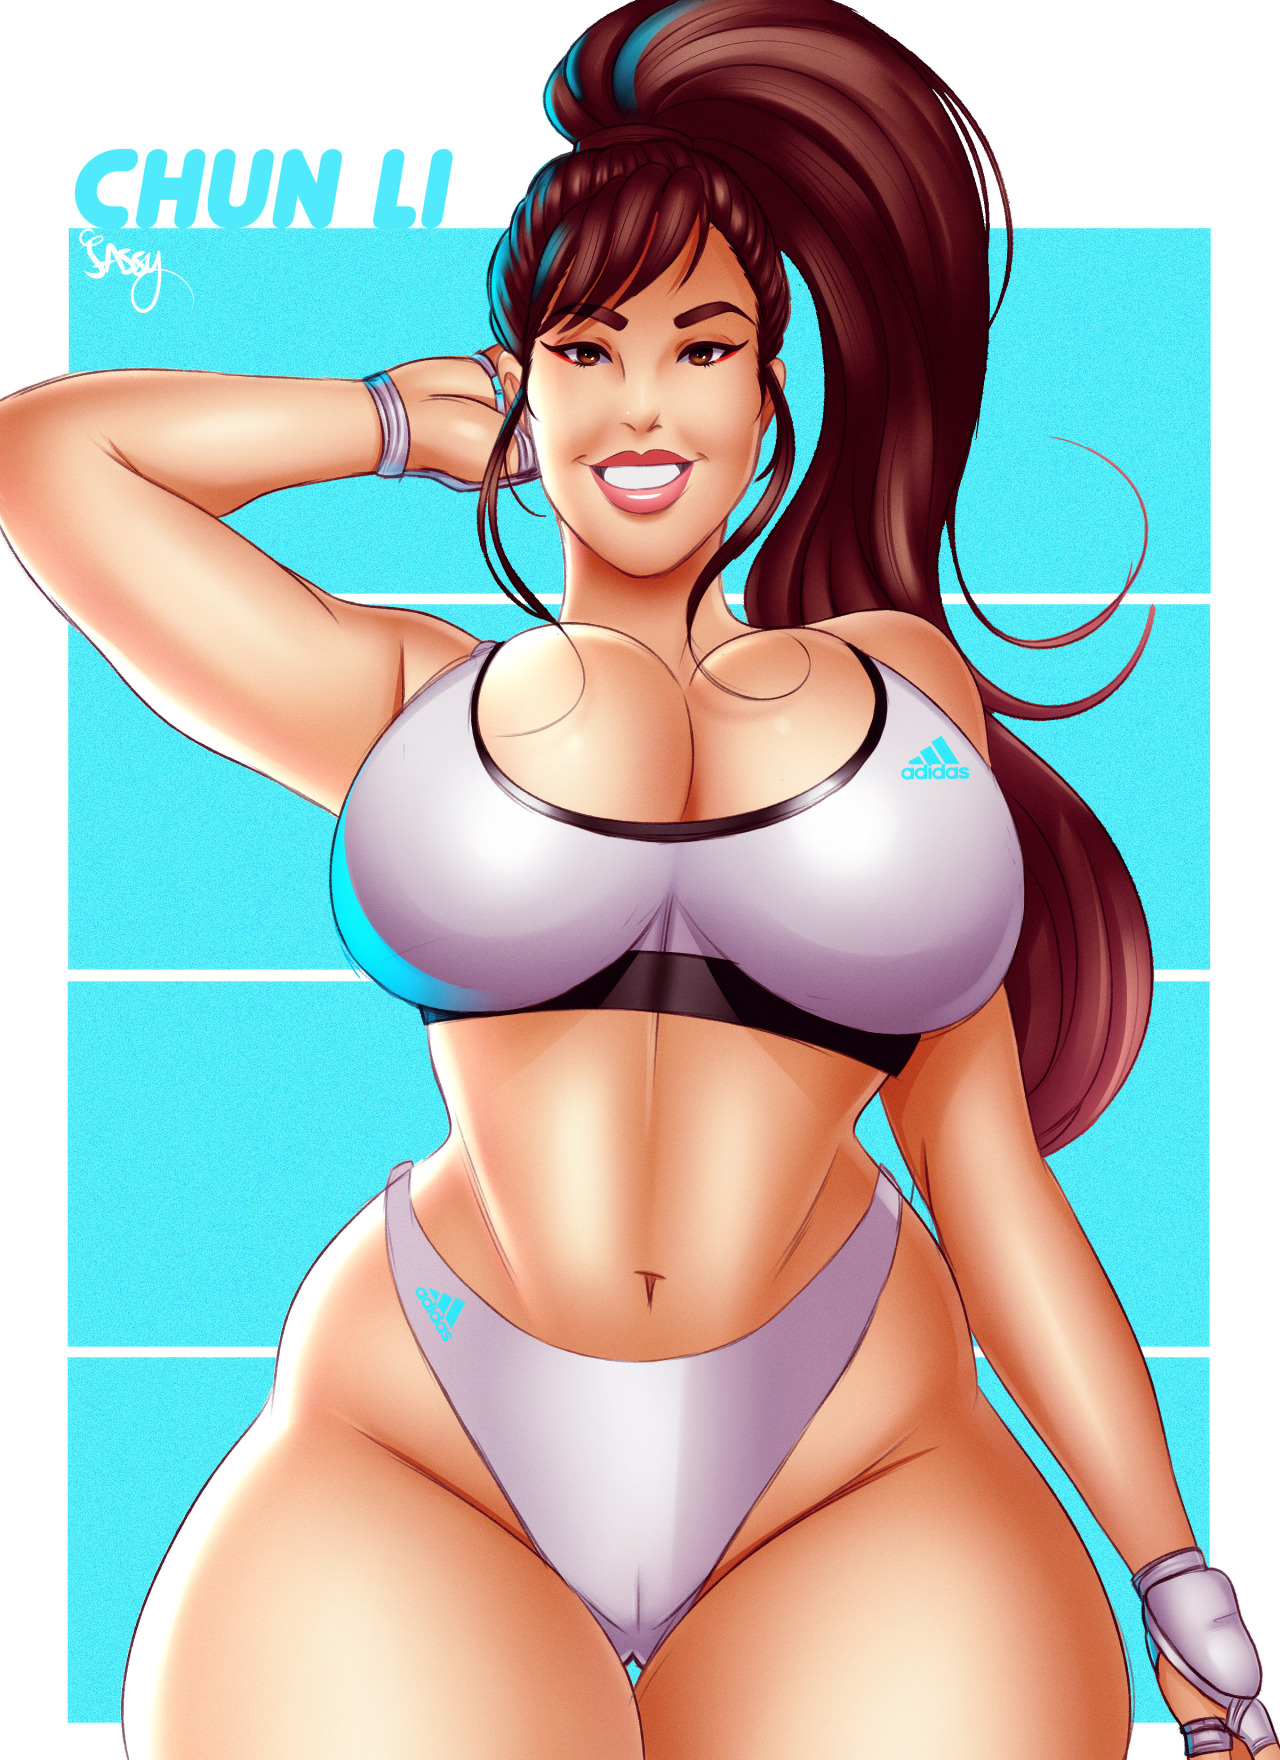 jassycoco:    Drew Chun Li in a sparring suit that was modded by BrutalAce on DA